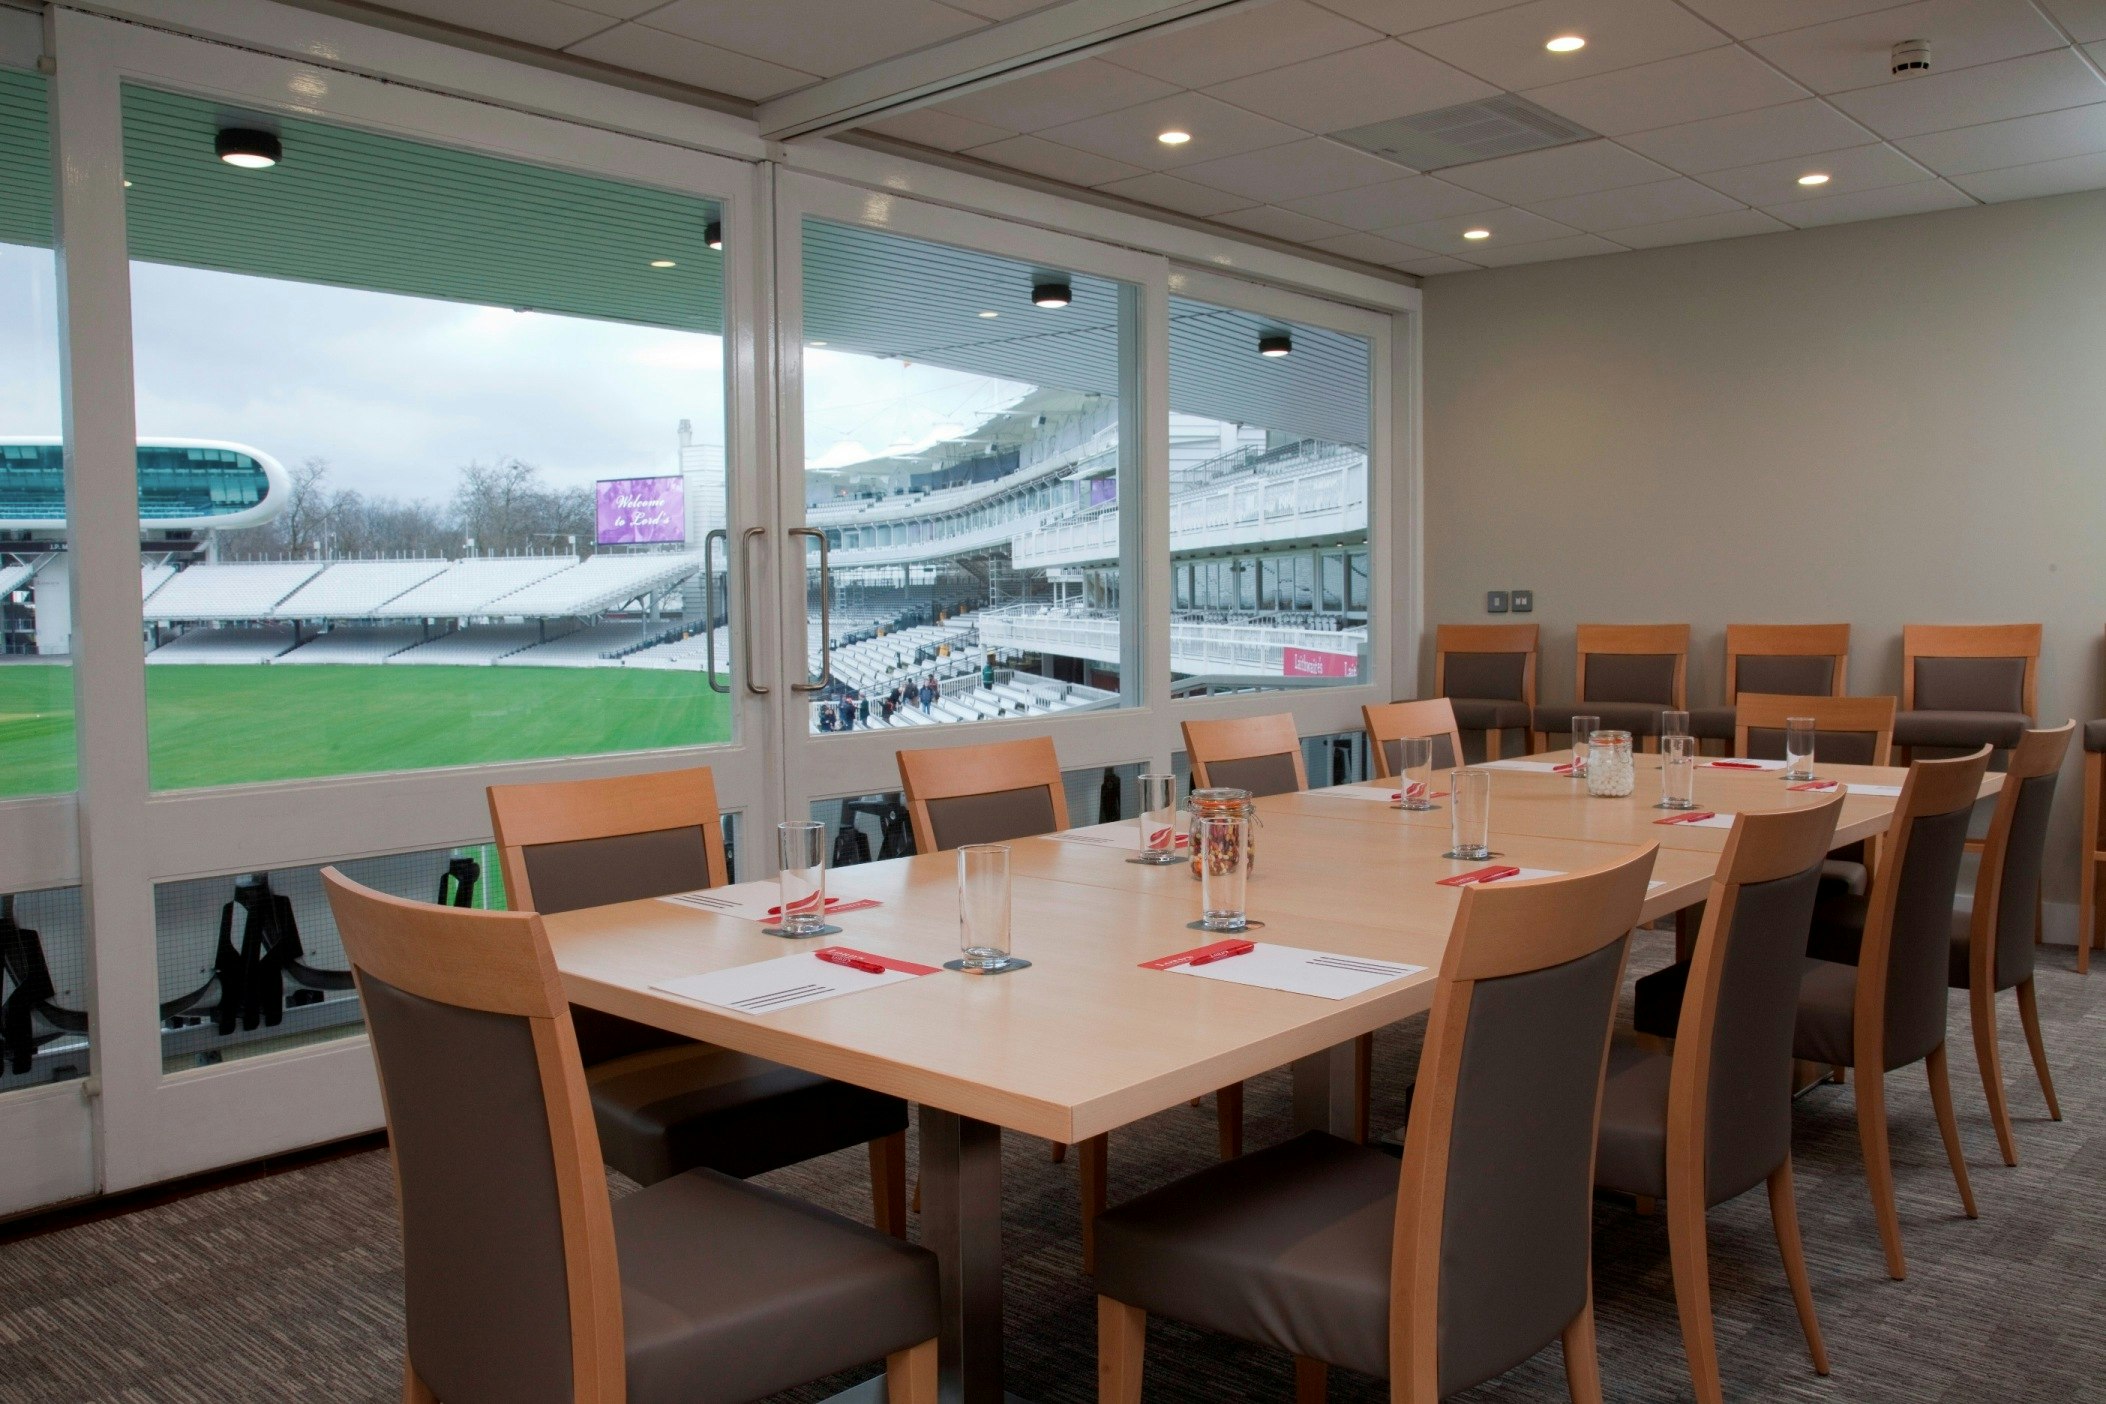 Workshop Venues in London - Lord's Cricket Ground